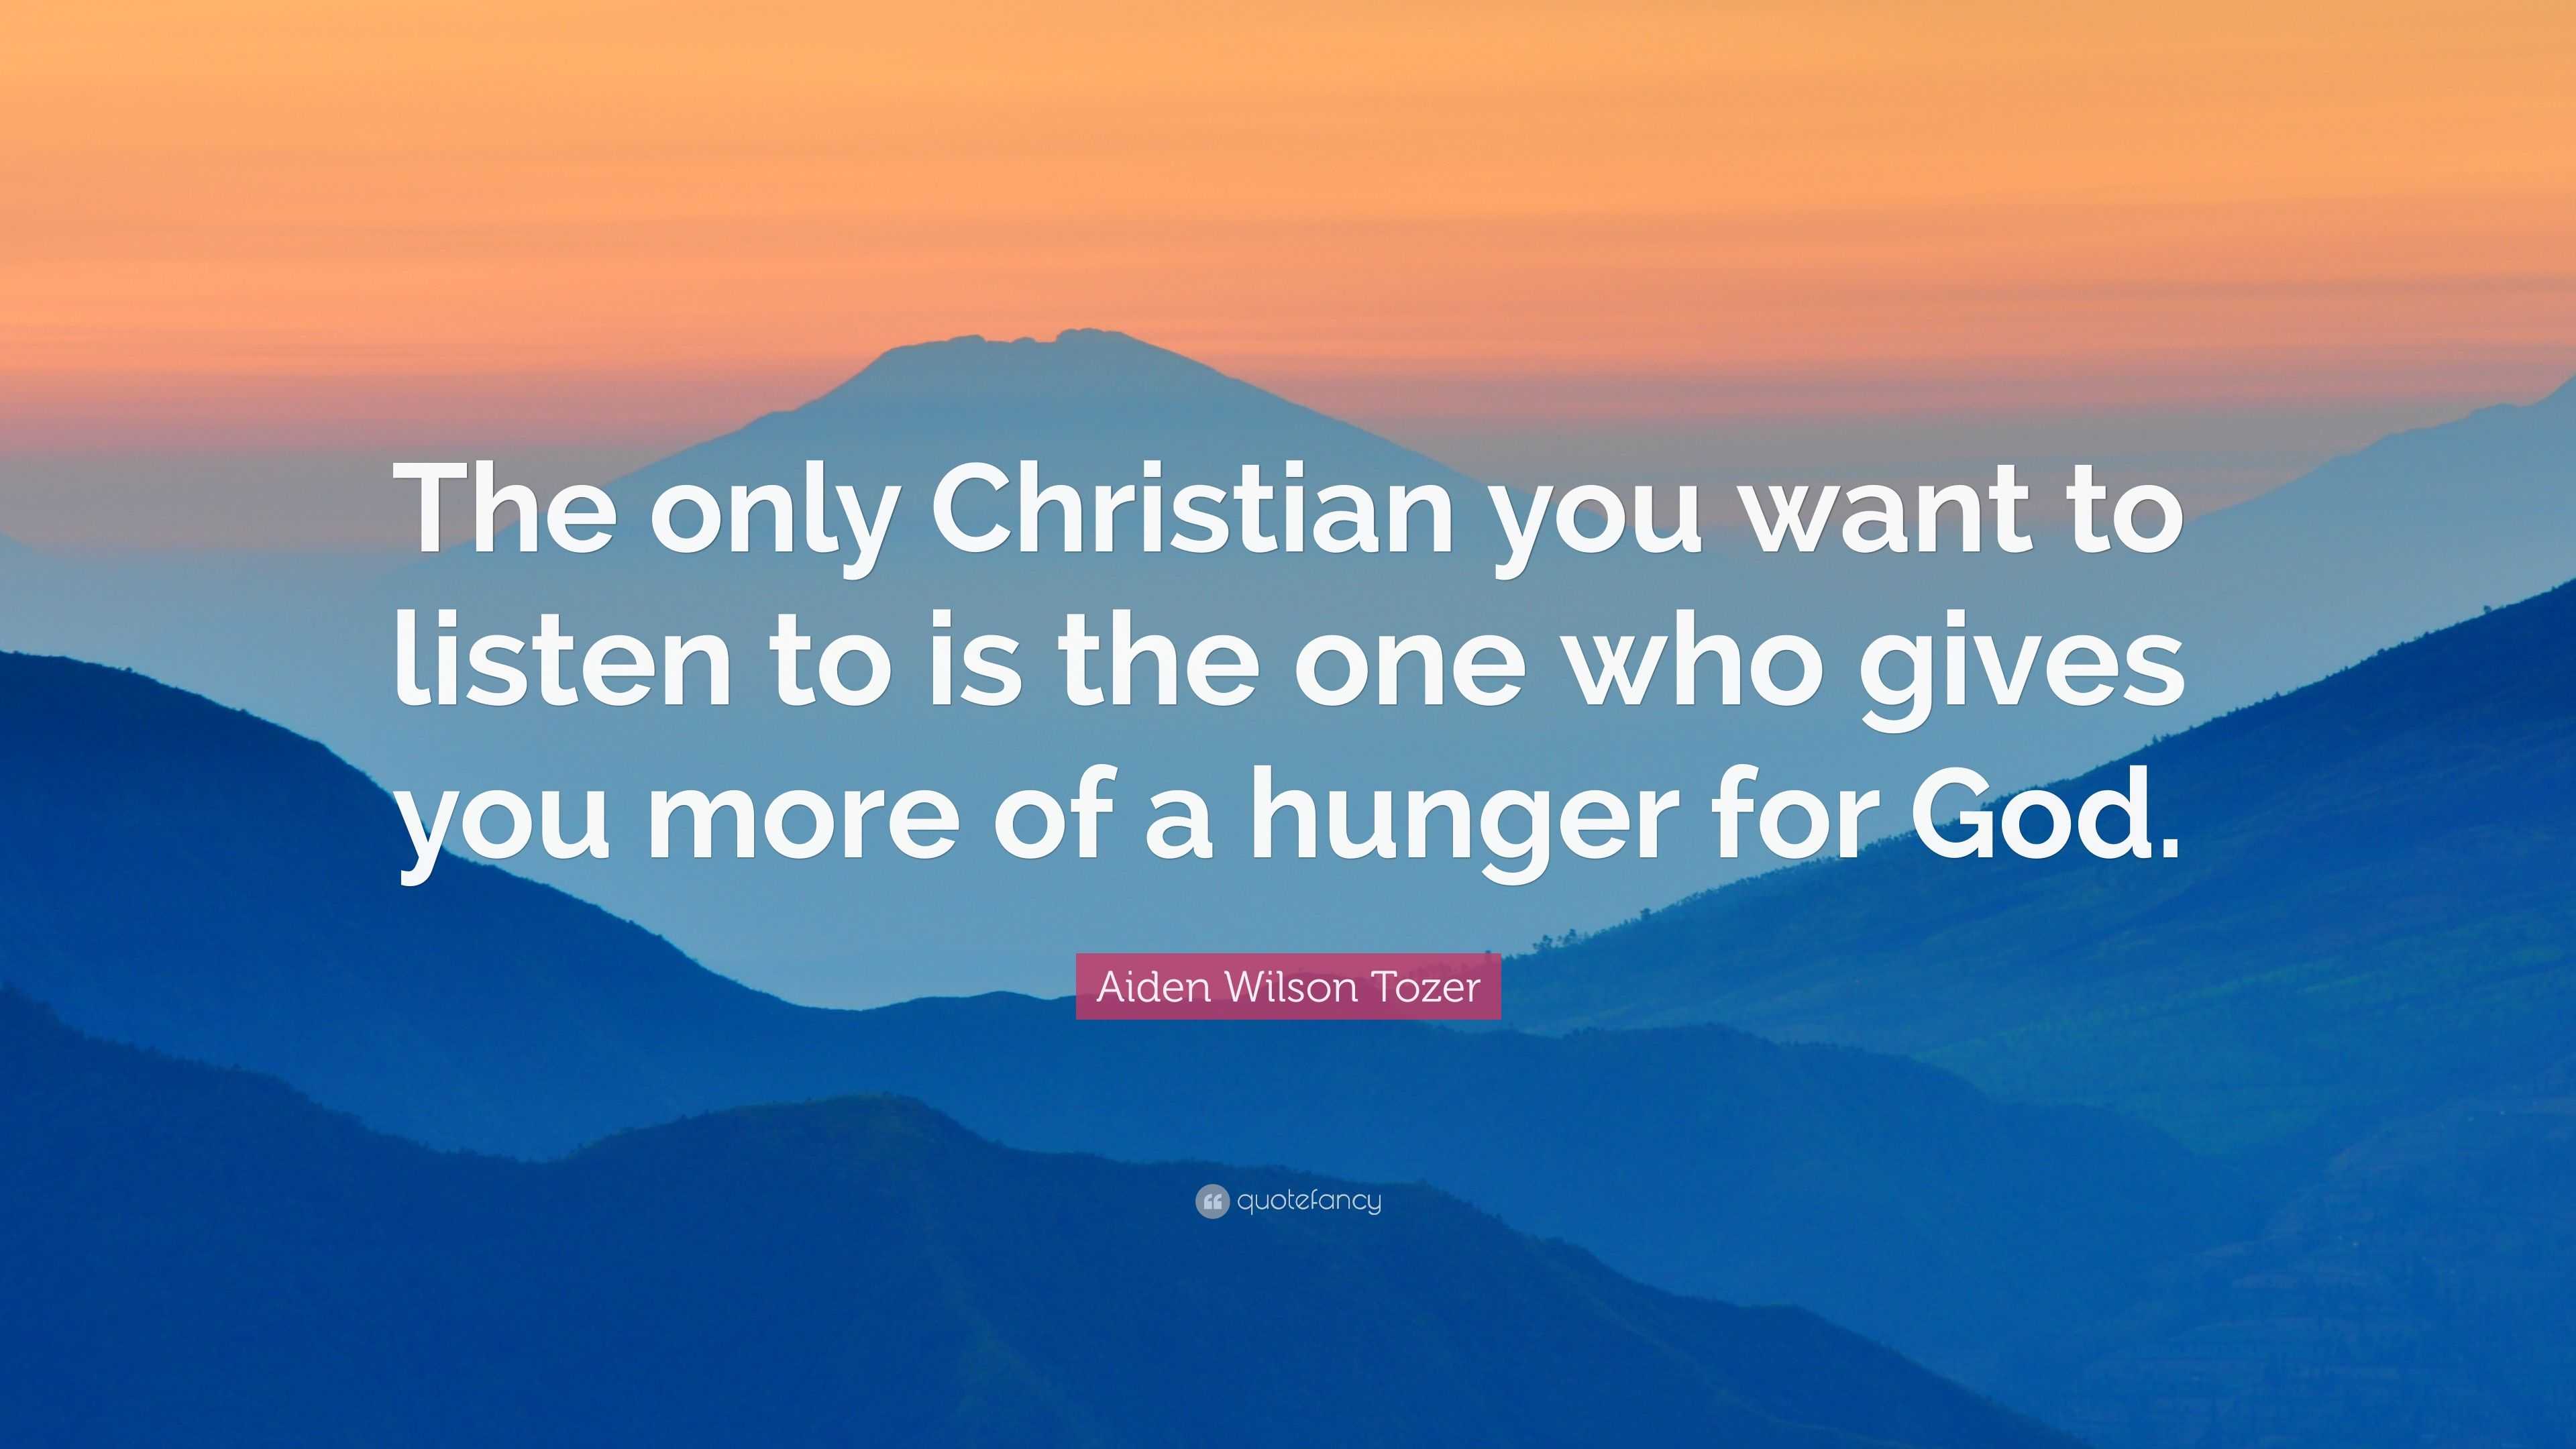 4291261-Aiden-Wilson-Tozer-Quote-The-only-Christian-you-want-to-listen-to.jpg